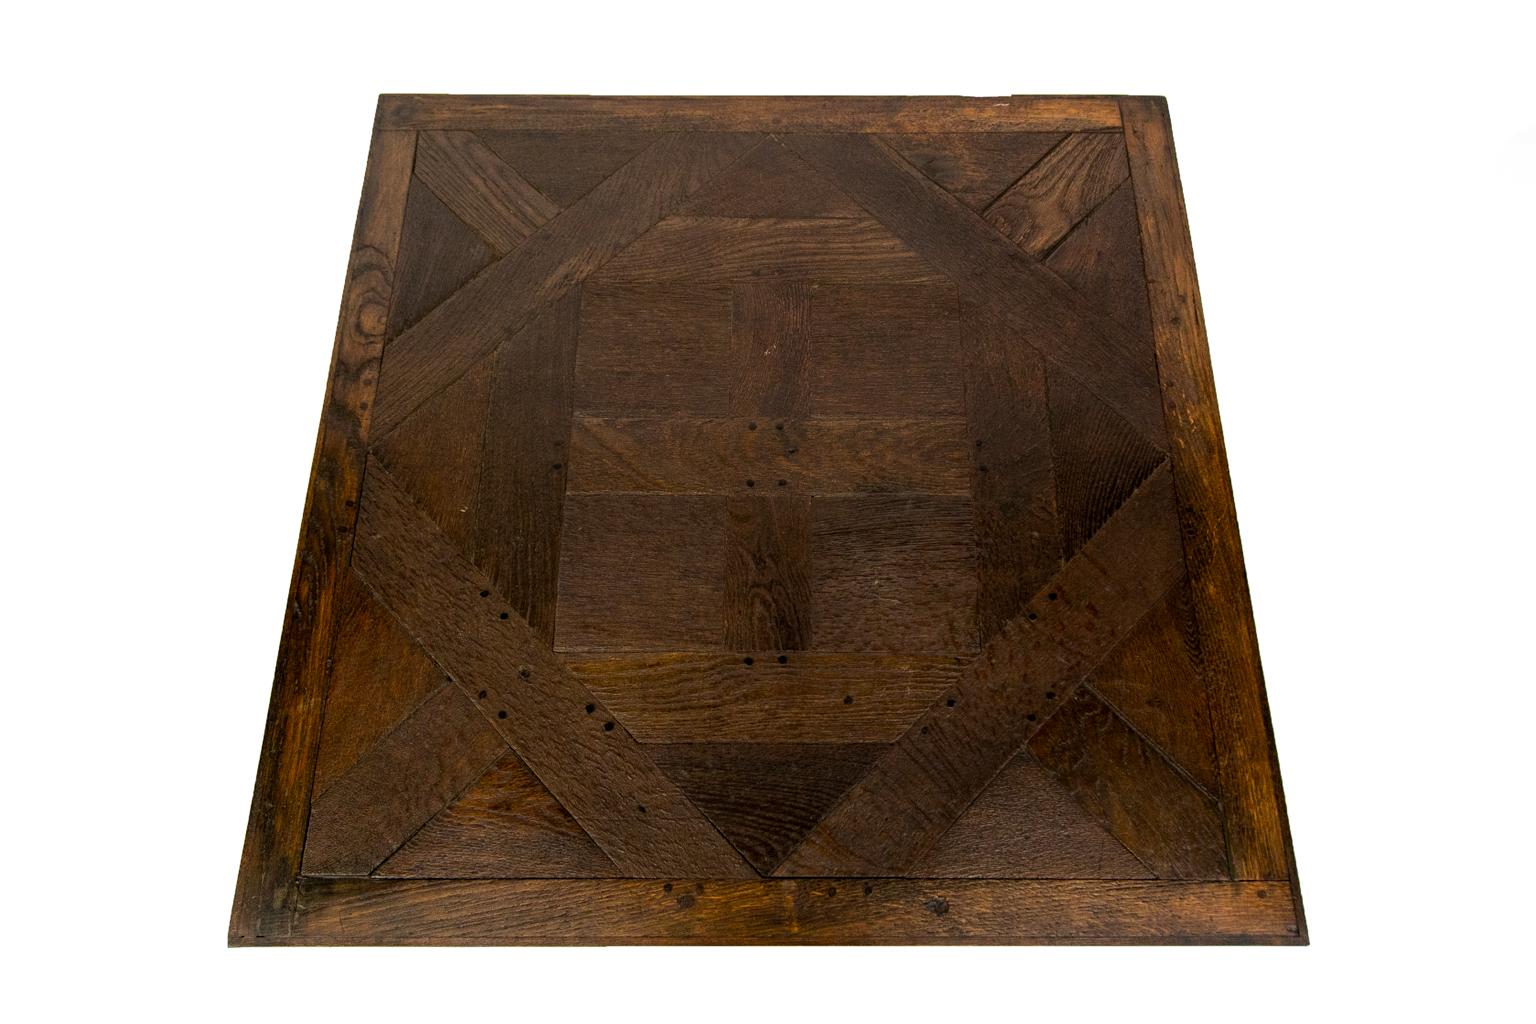 English oak coffee table is made from reclaimed antique flooring and has exposed double peg construction. The top is constructed with geometric patterns resting on four square legs.